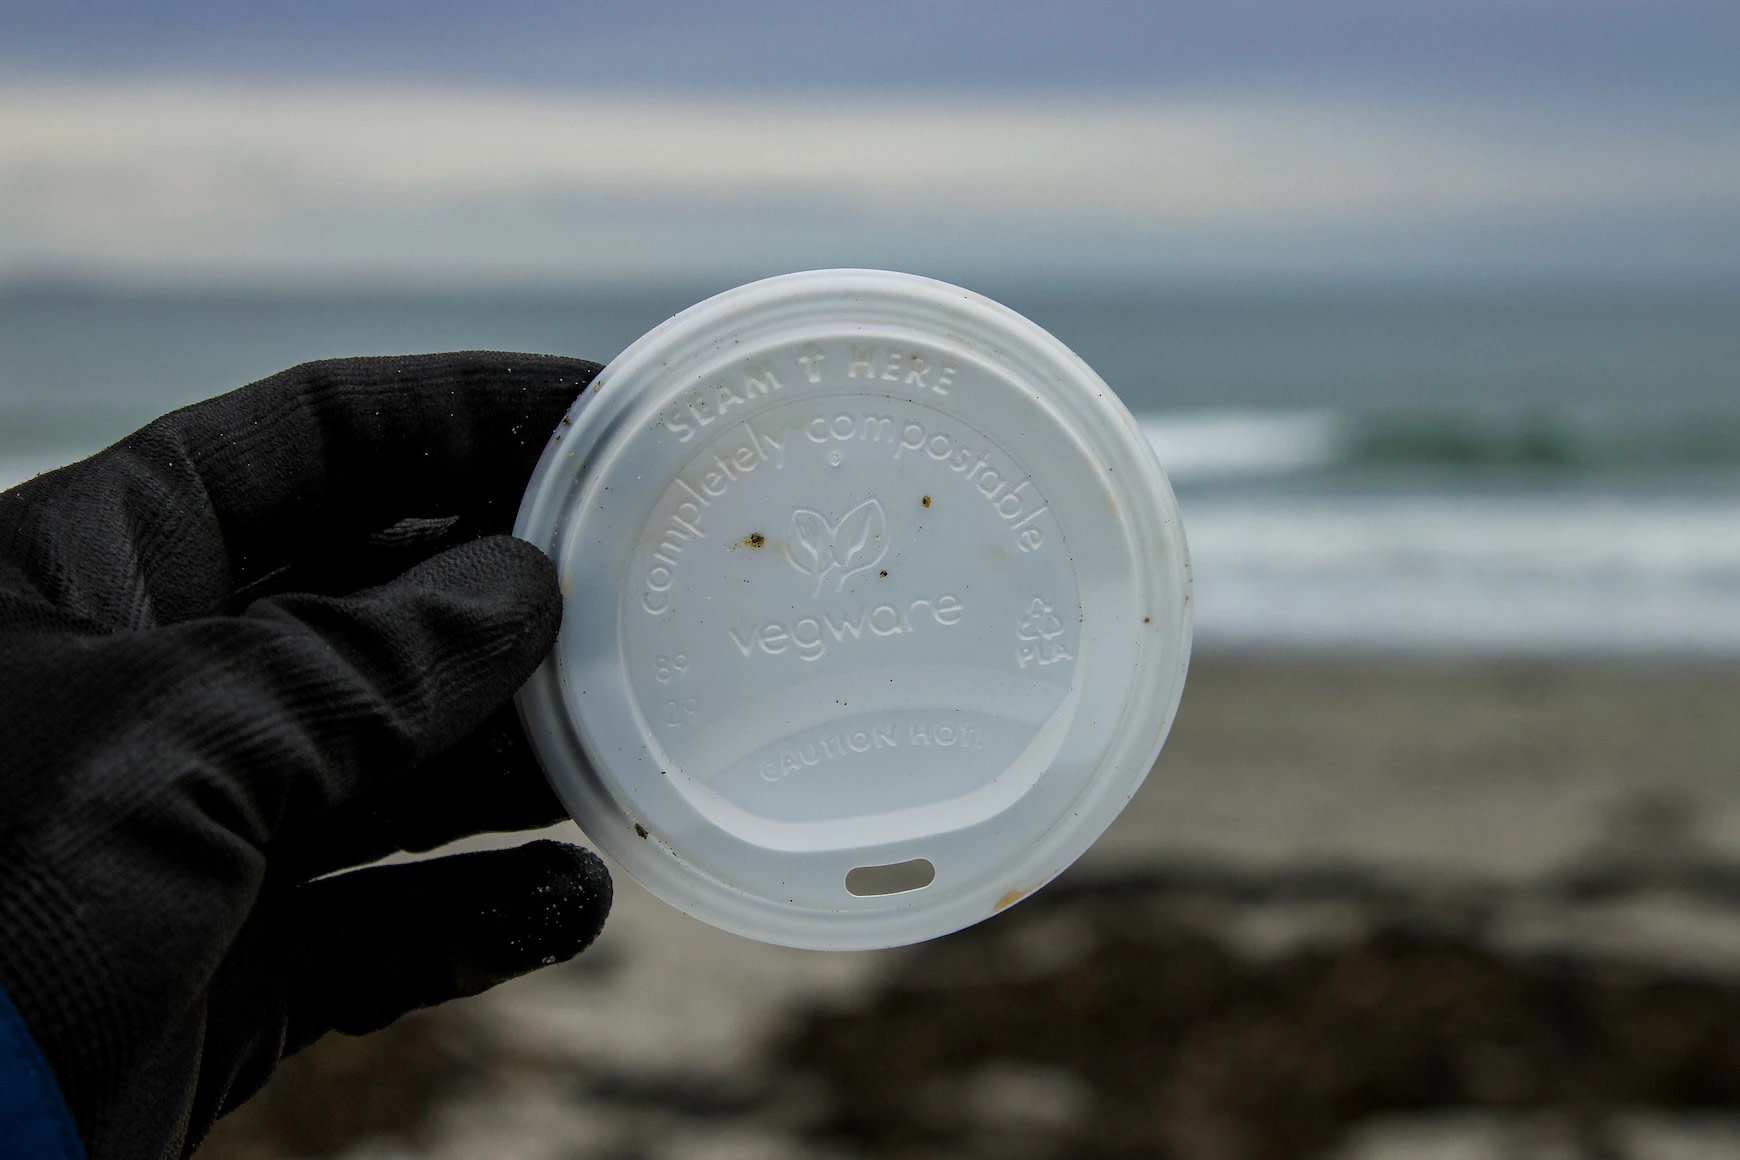 Image of compostable plastic coffee lid found on beach cleanup